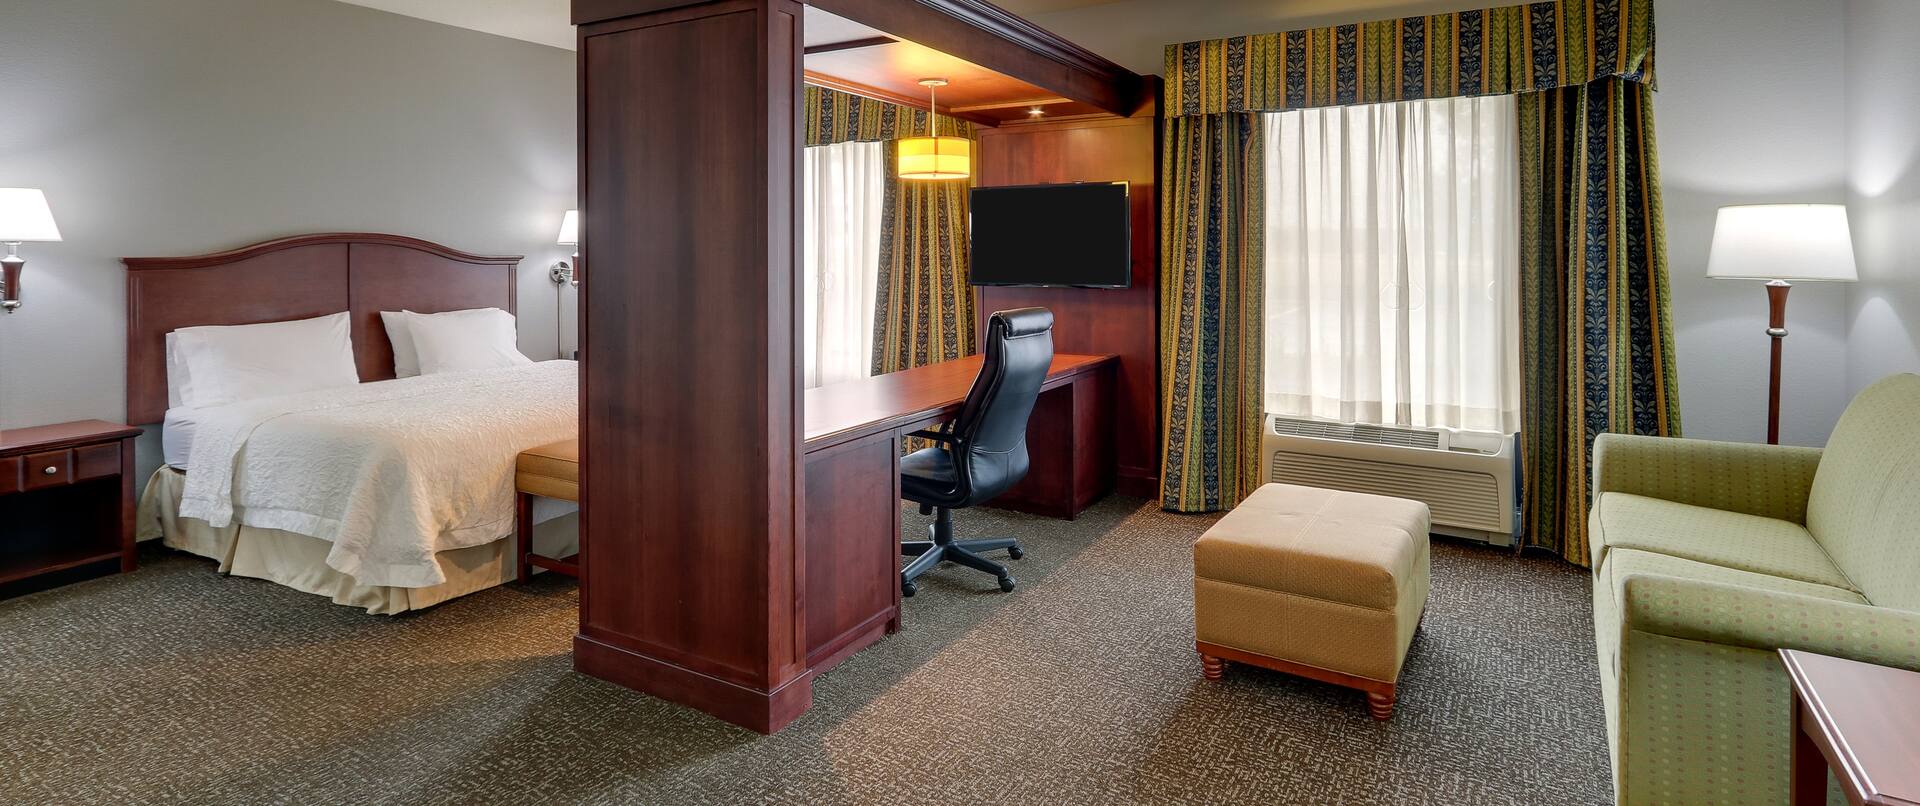 Suite with seating area, desk and double bed